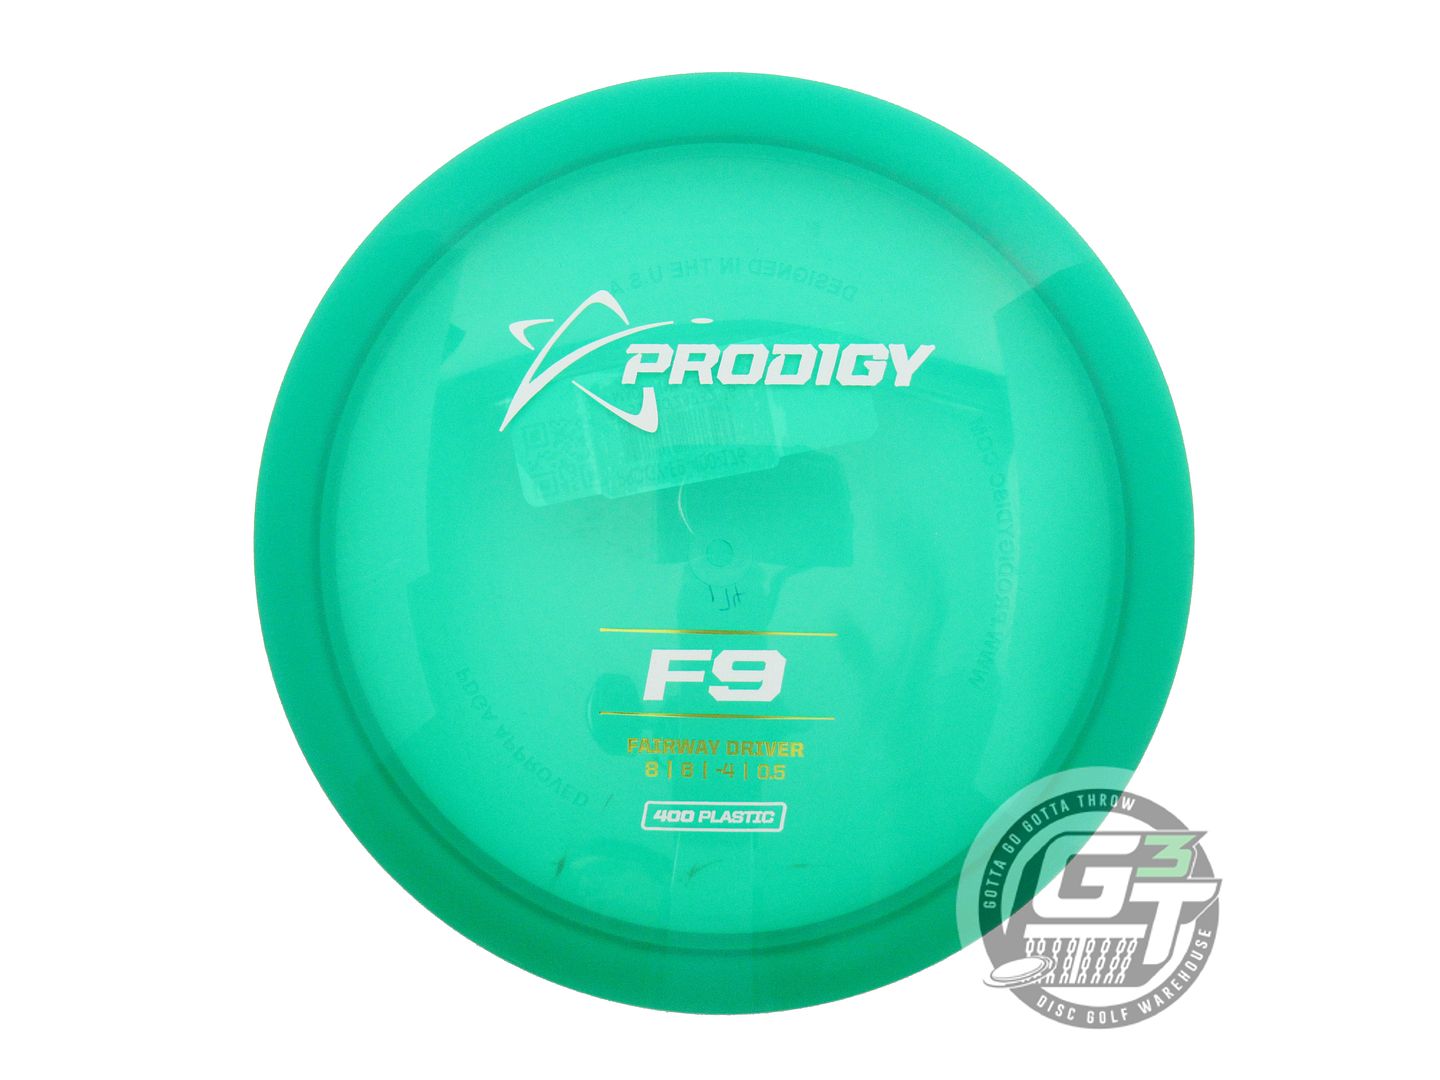 Prodigy 400 Series F9 Fairway Driver Golf Disc (Individually Listed)